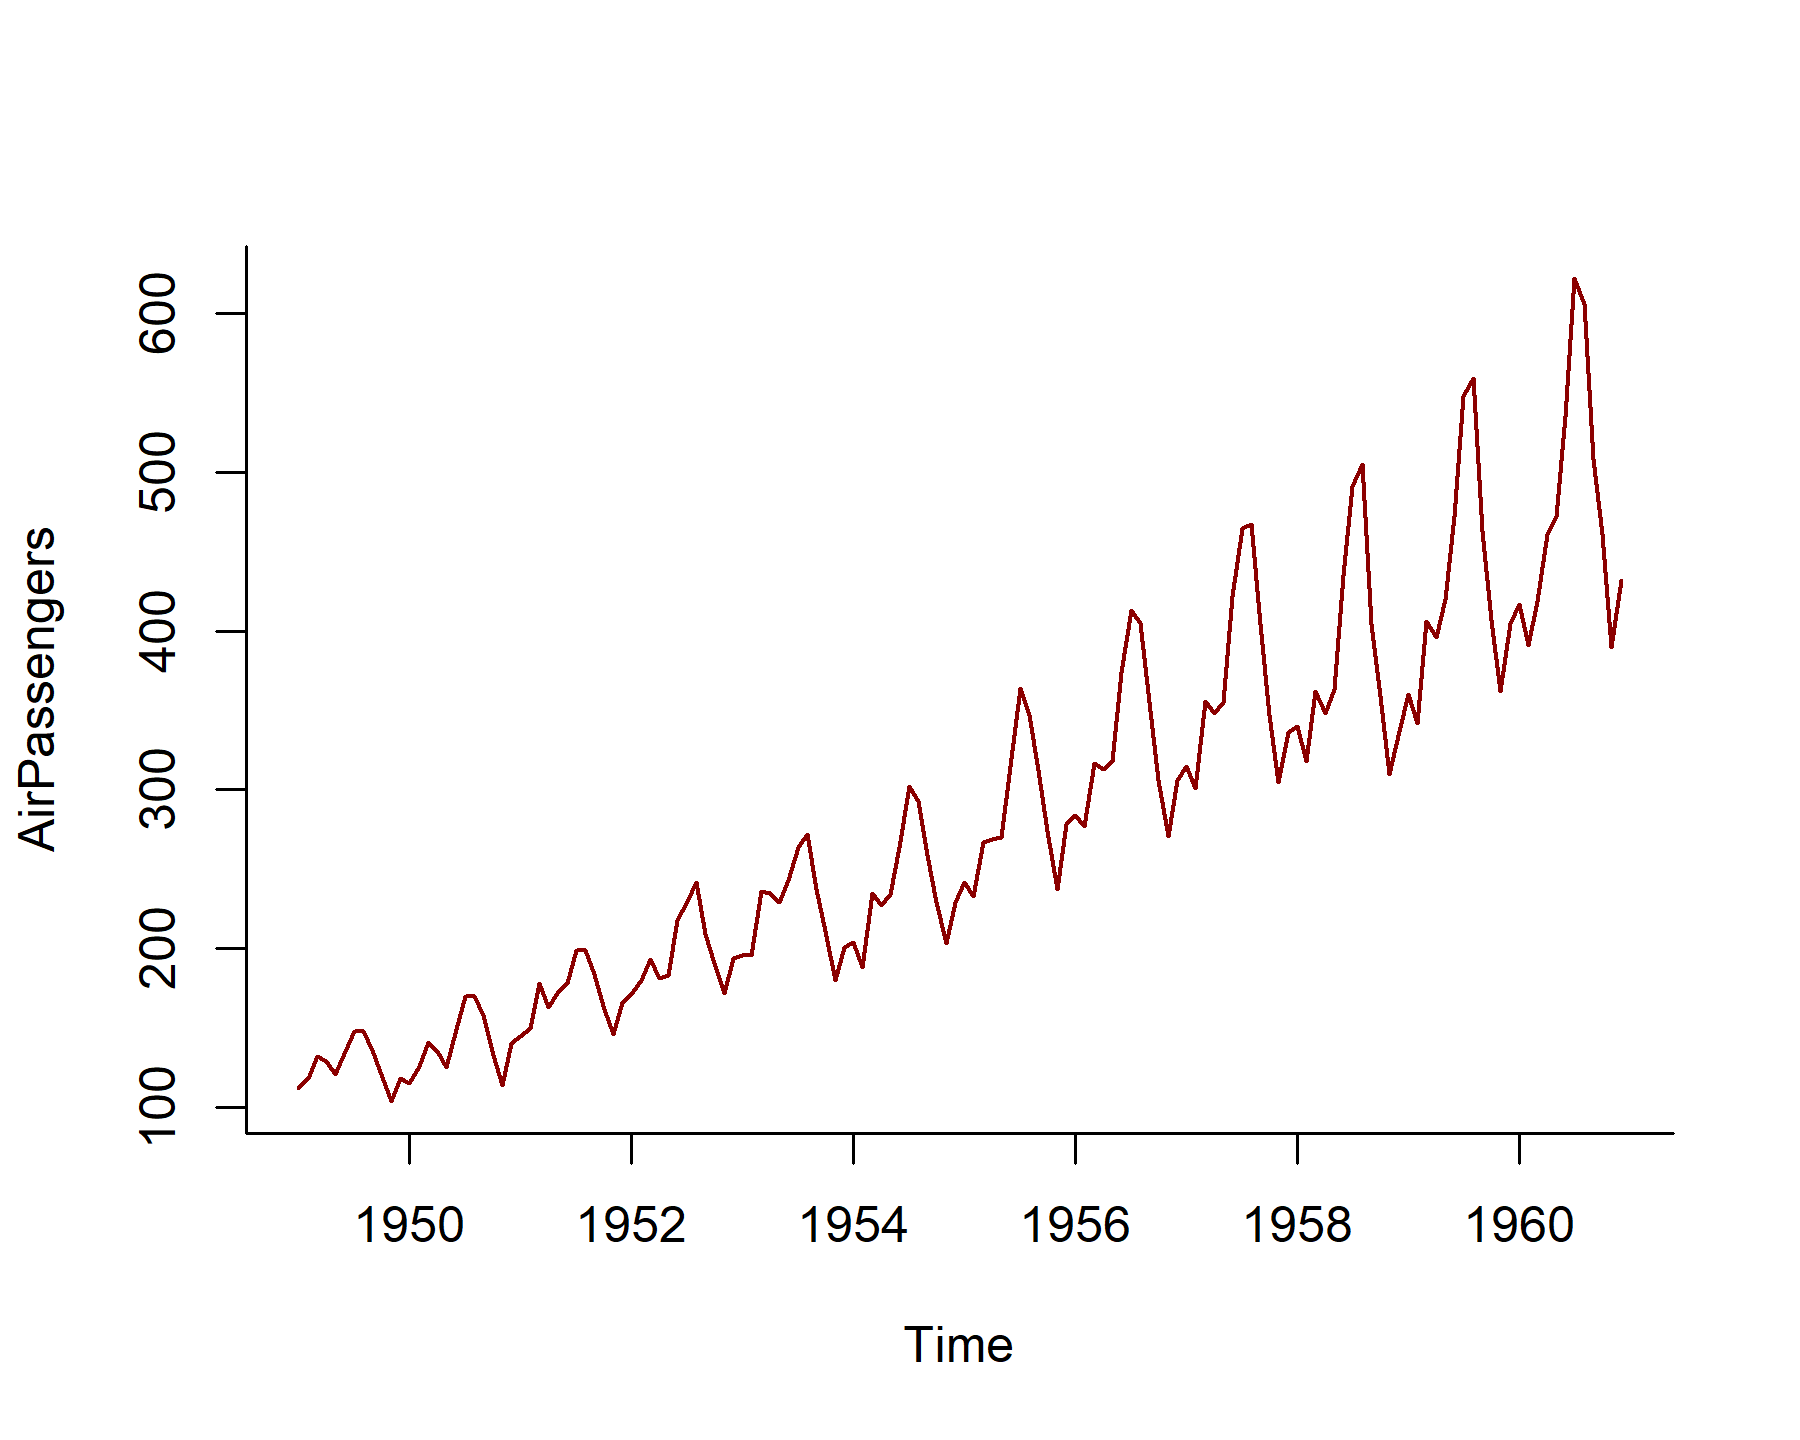 The AirPassengers time series in R